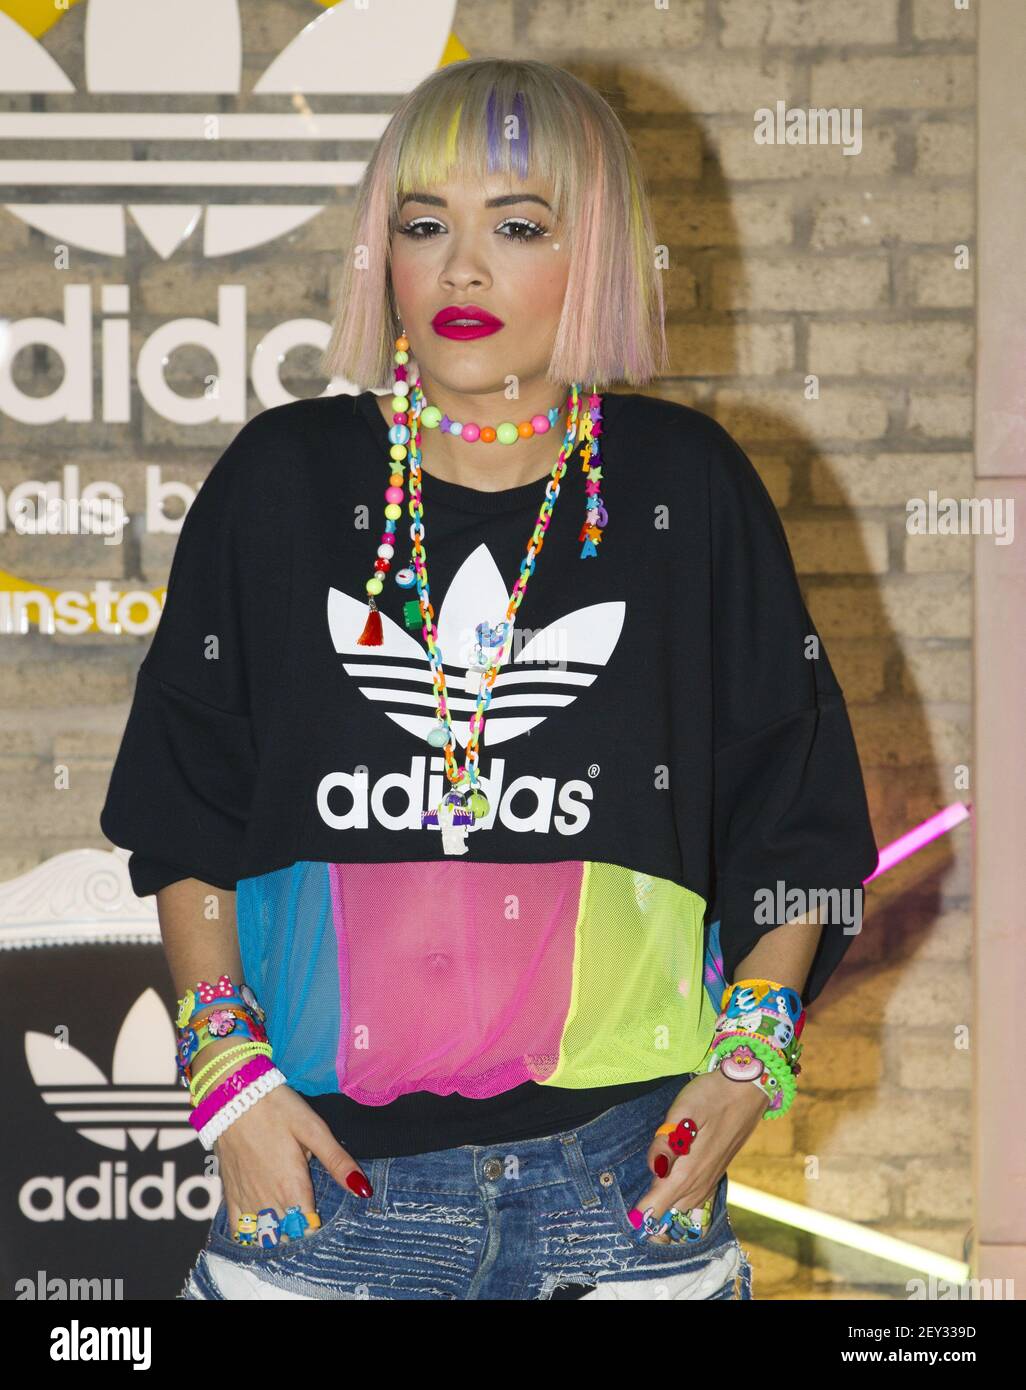 23 September 2014 - Seoul, South Korea British singer actress Rita Ora attends a photo for the "Originals by Rita Ora" collection launching event at Adidas originals flagship